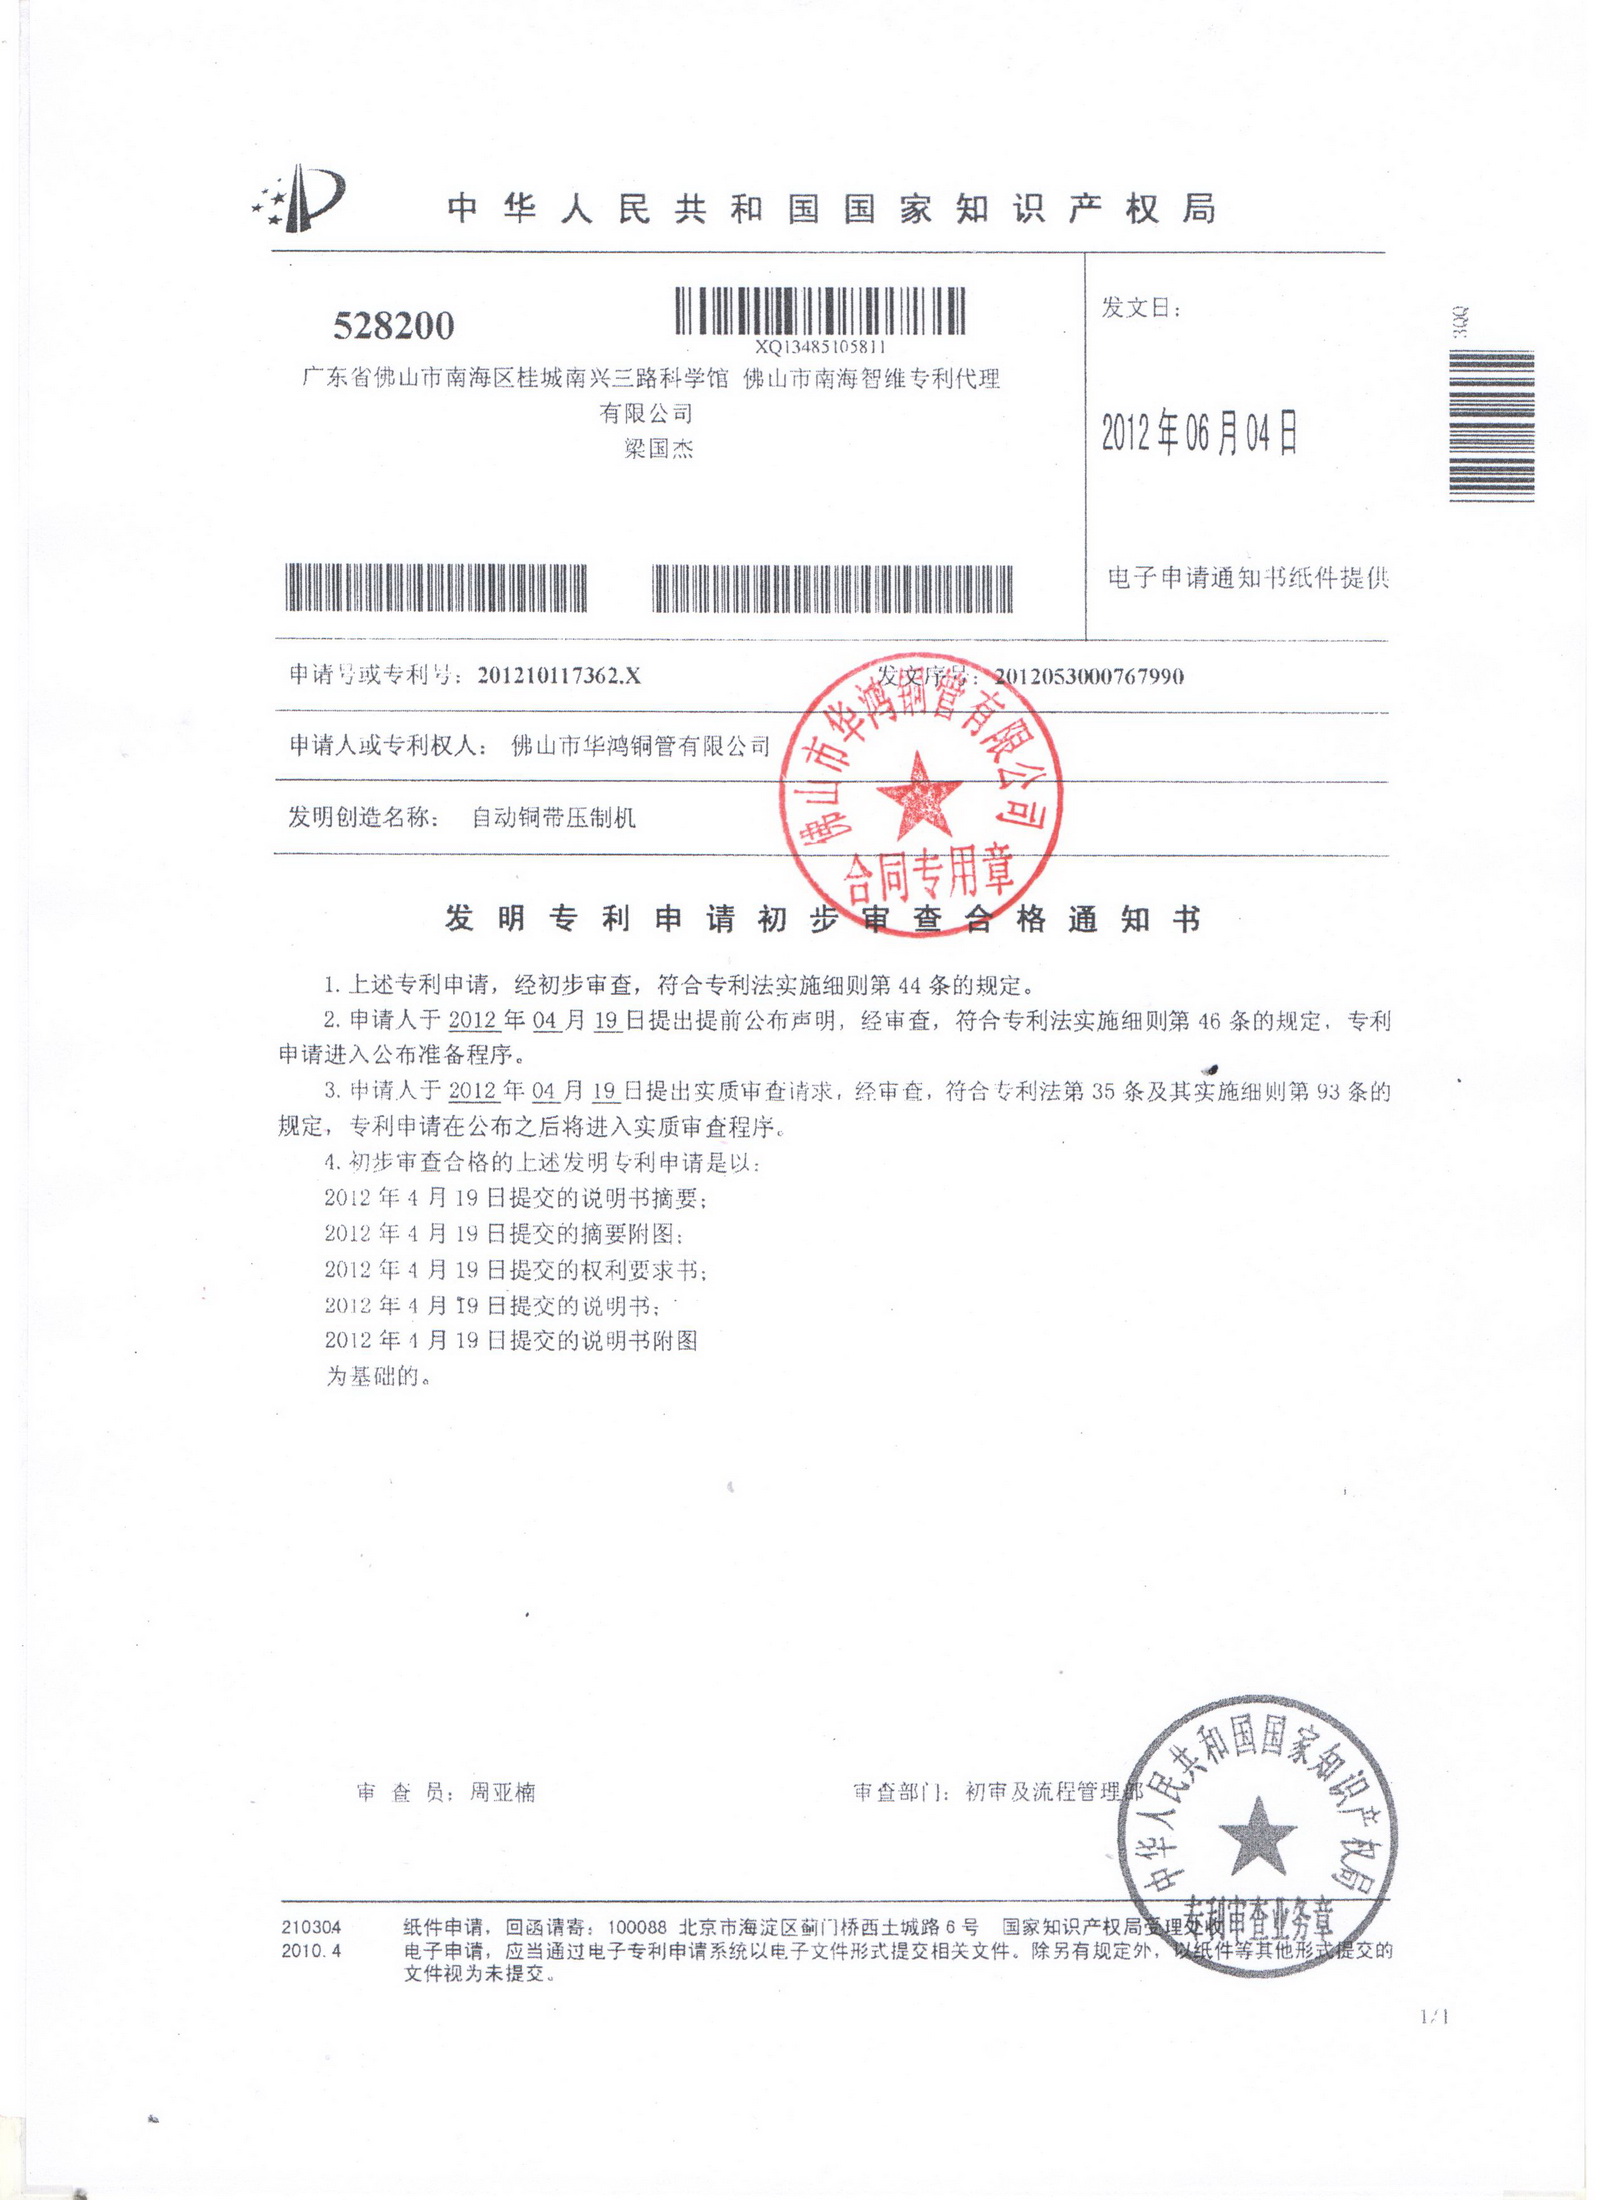 Notification of qualified preliminary examination of the invention patent application